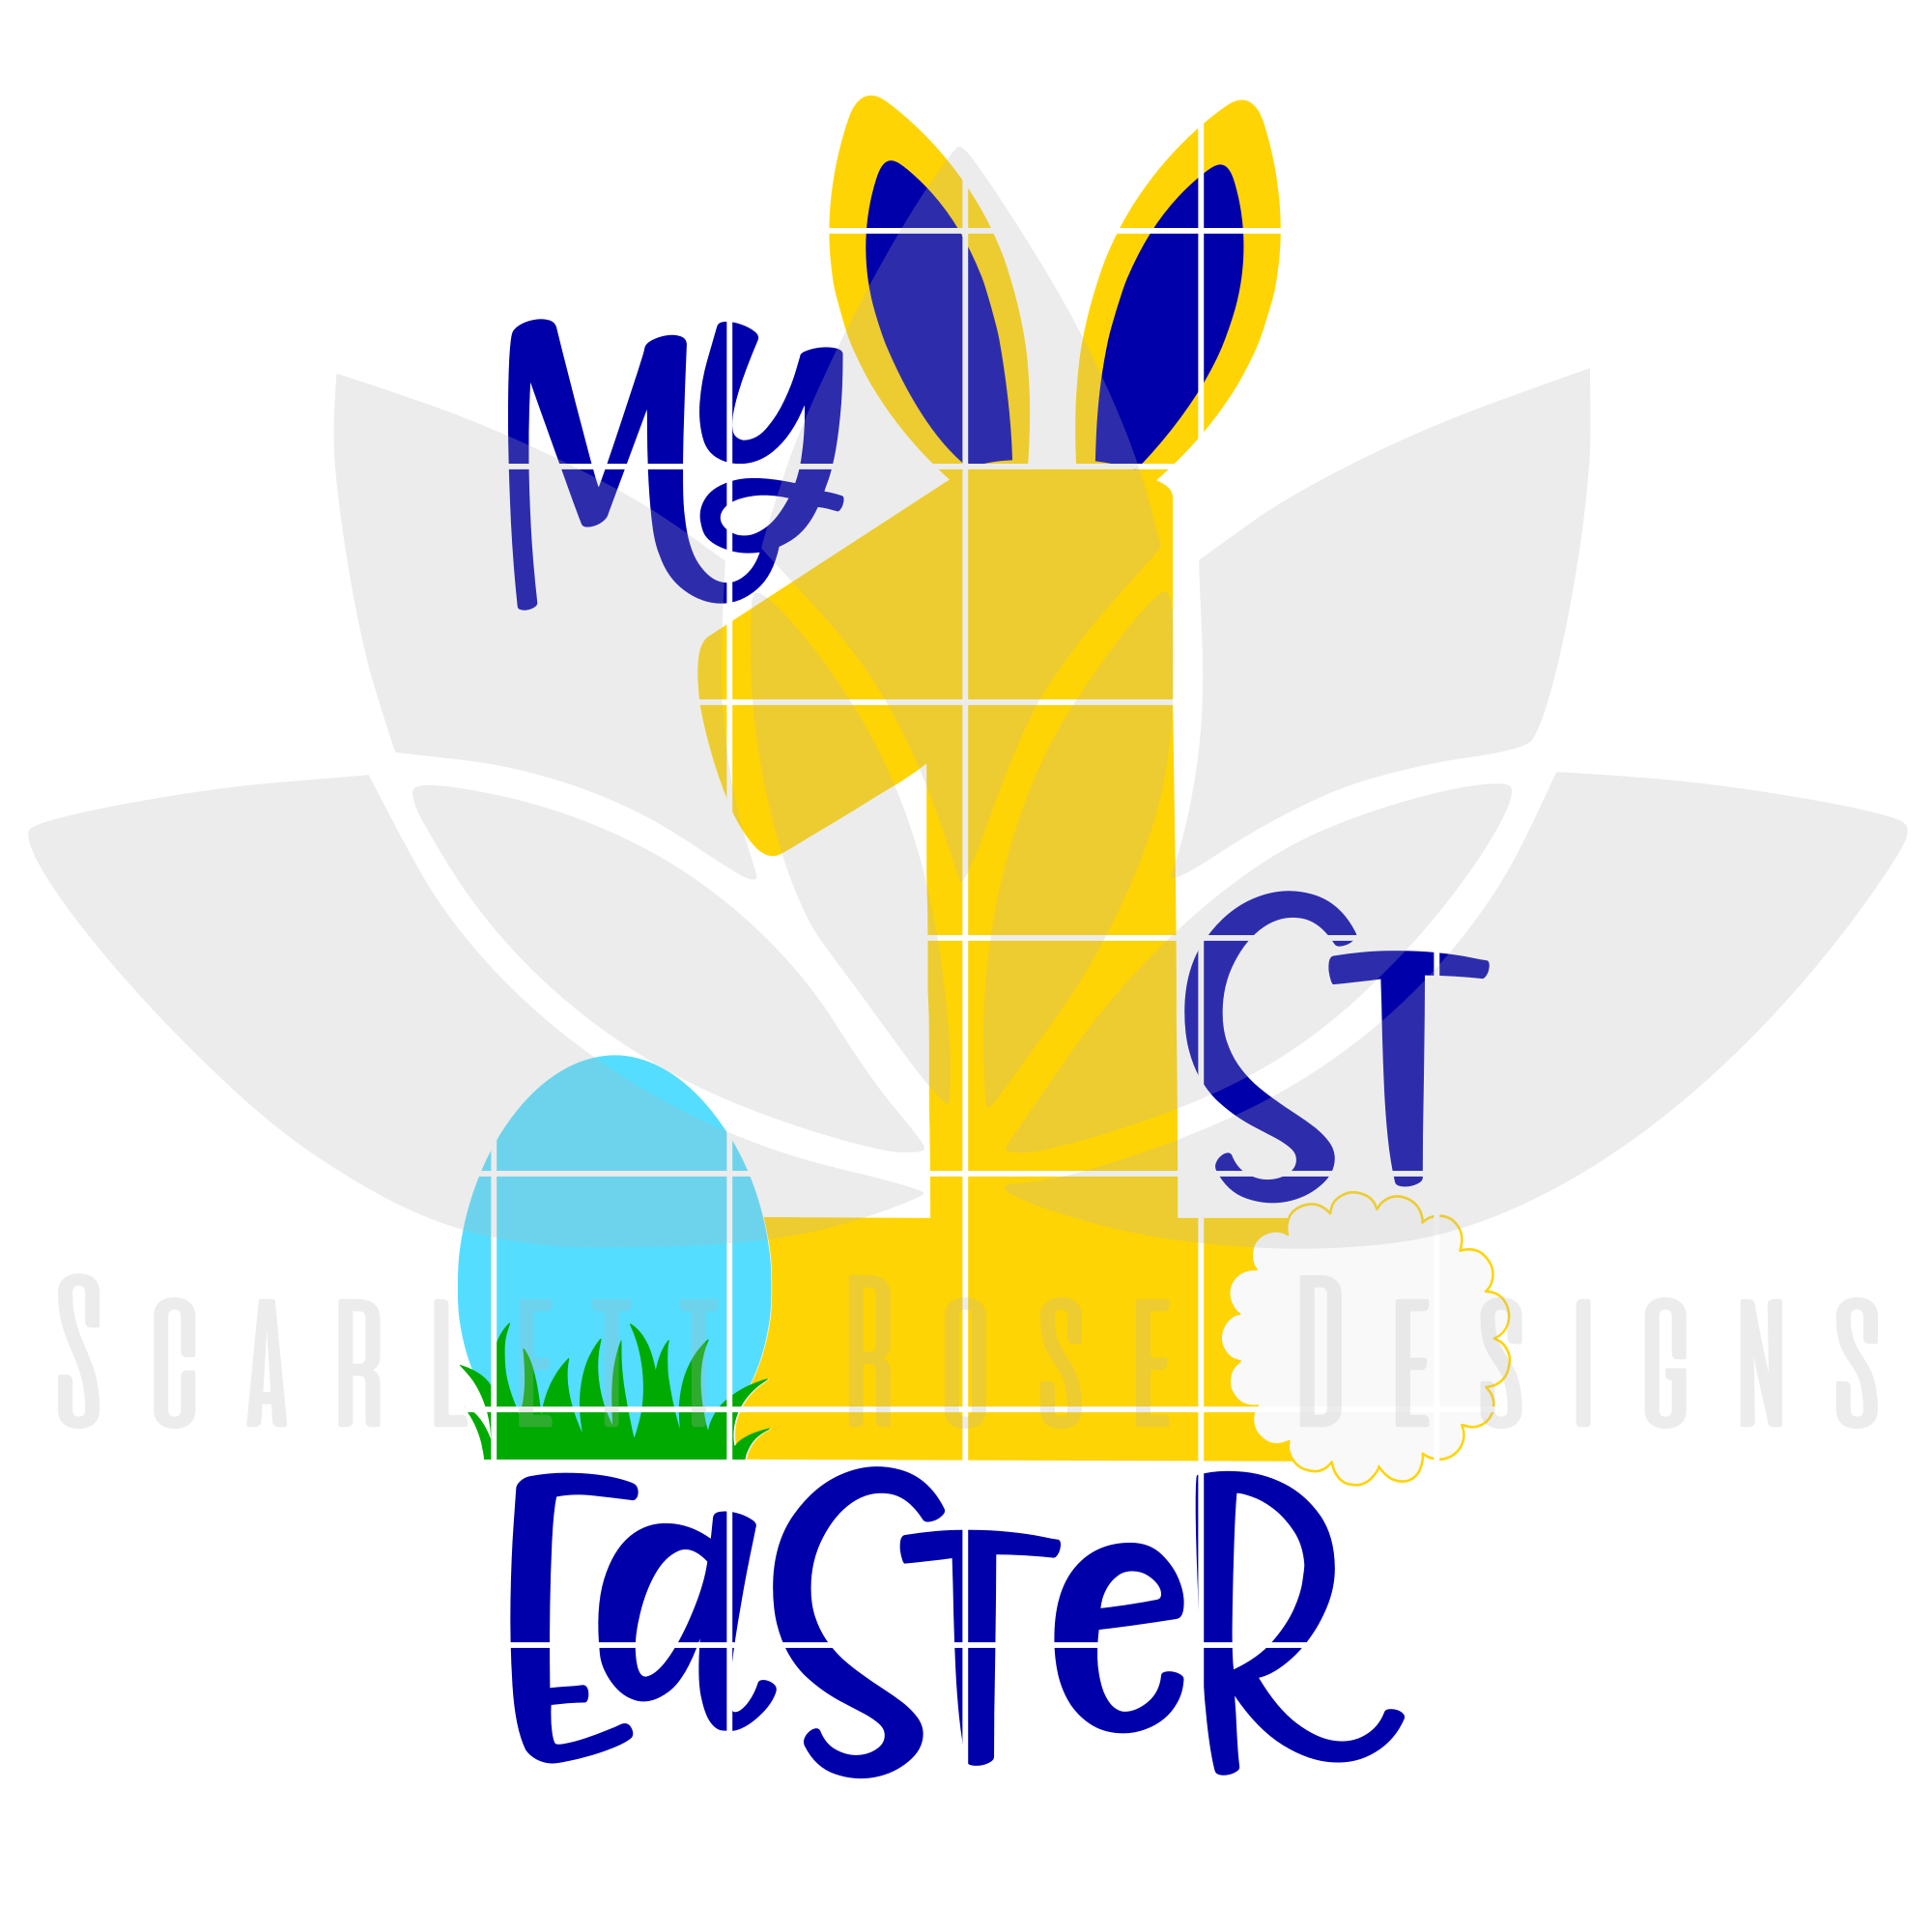 Download My First Easter, Easter Bunny SVG, DXF cut file - Scarlett Rose Designs